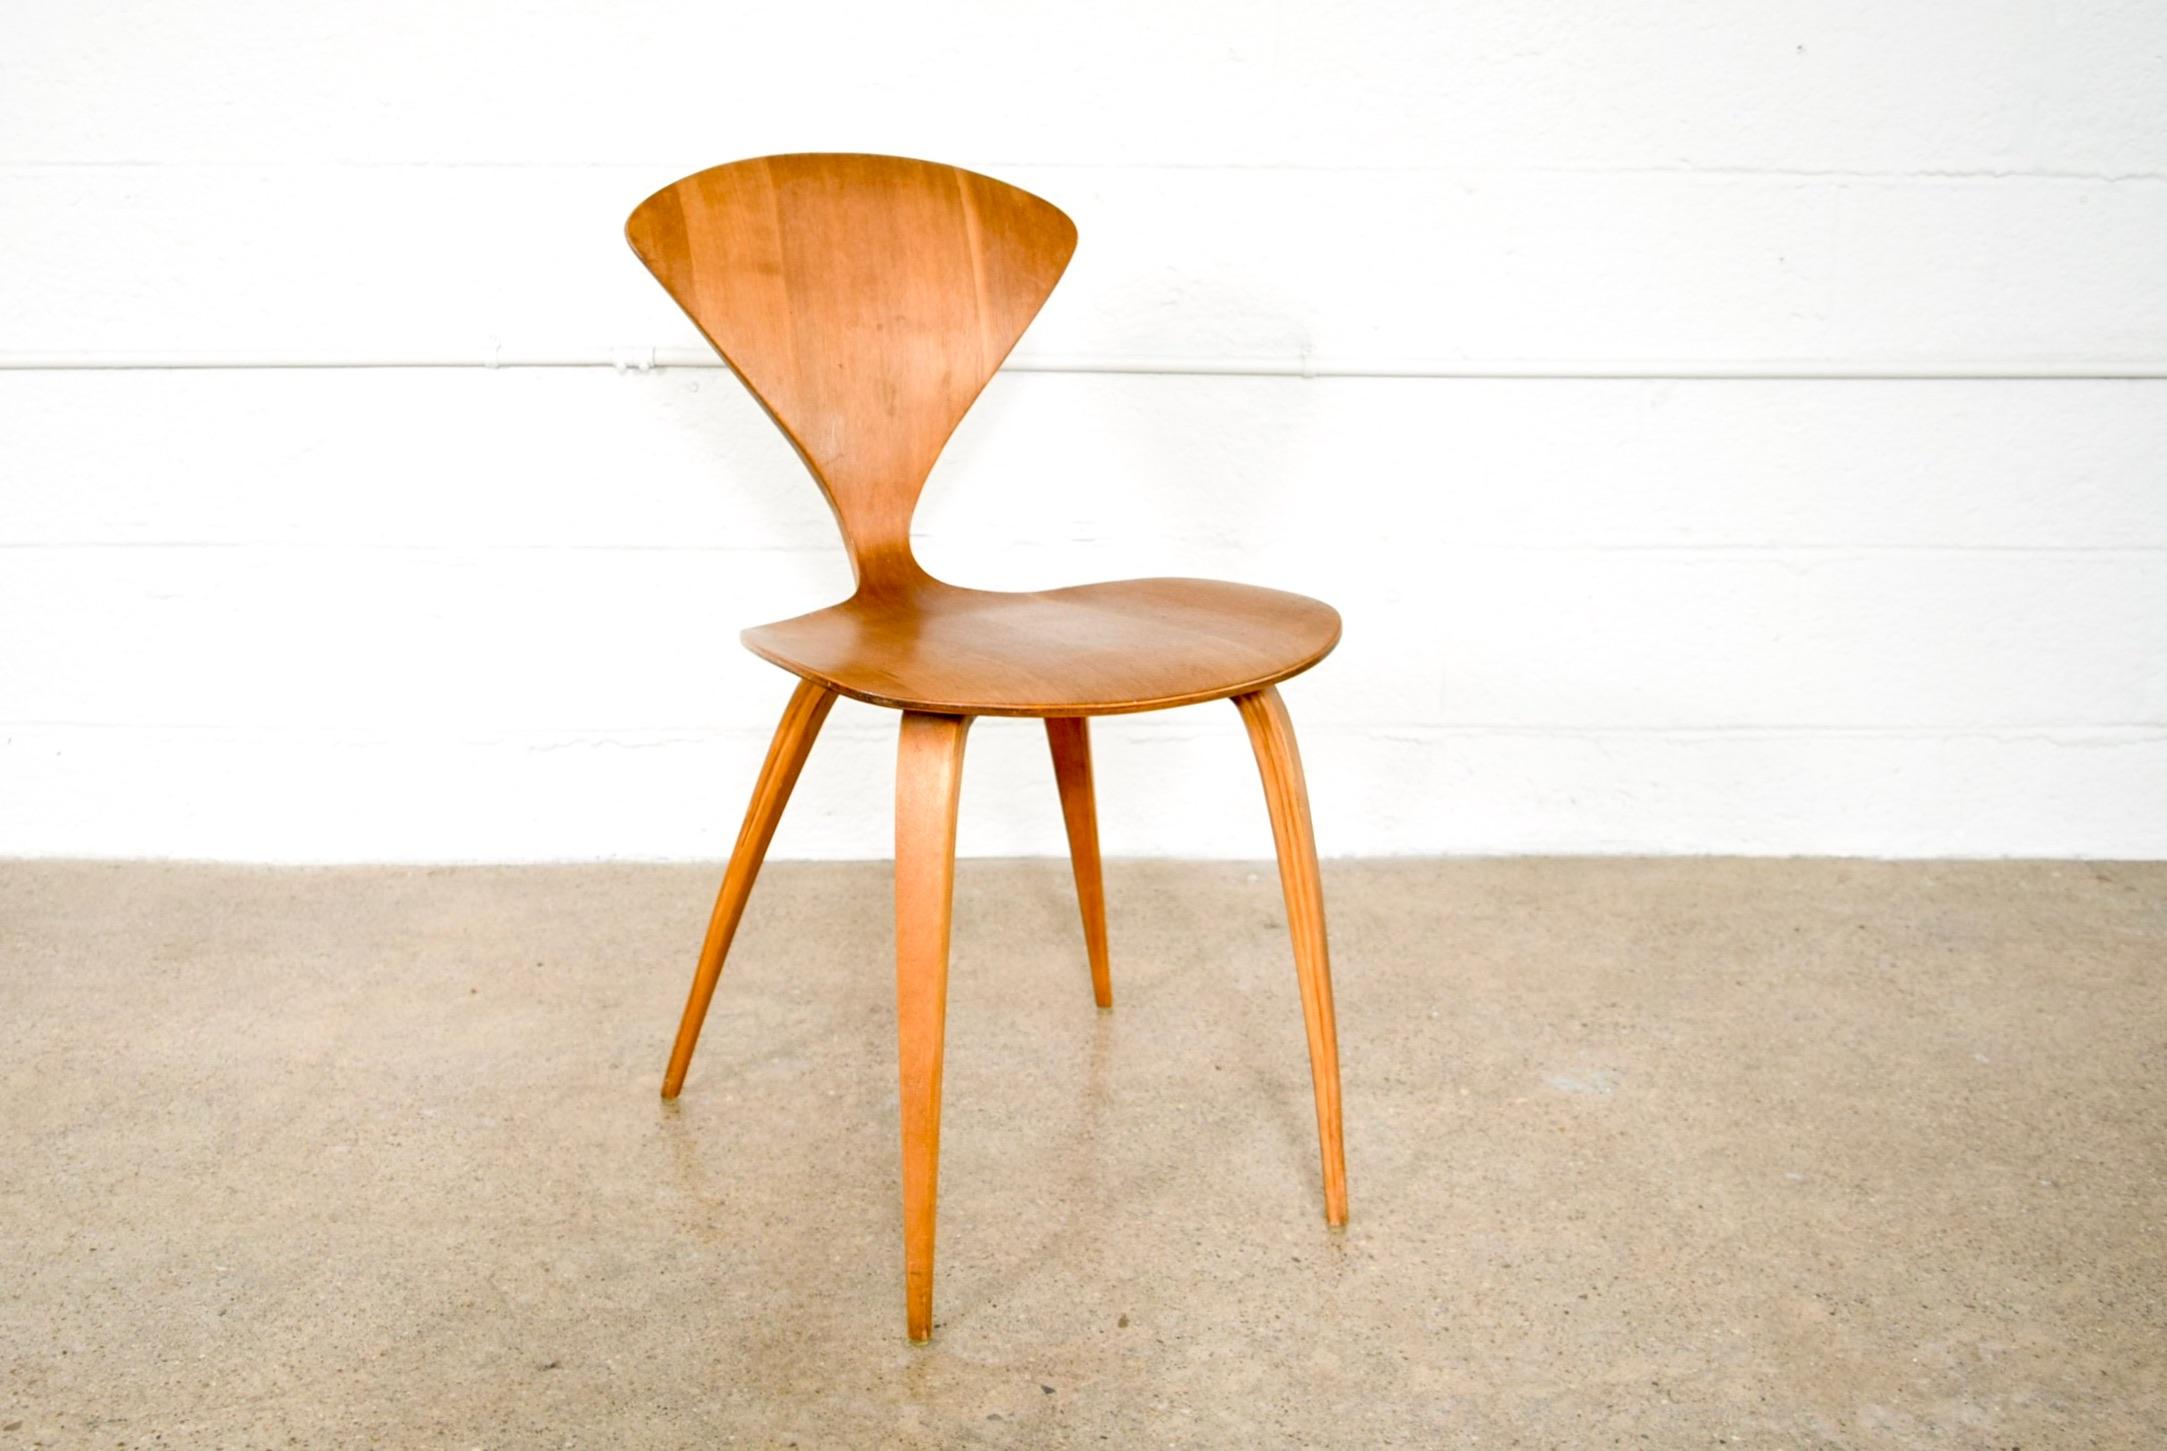 This vintage Mid-Century Modern molded plywood side chair was designed by Norman Cherner for Plycraft in 1958. The iconic sculptural design features elegant curves and a sleek Danish-inspired profile. The chair is exquisitely crafted from molded